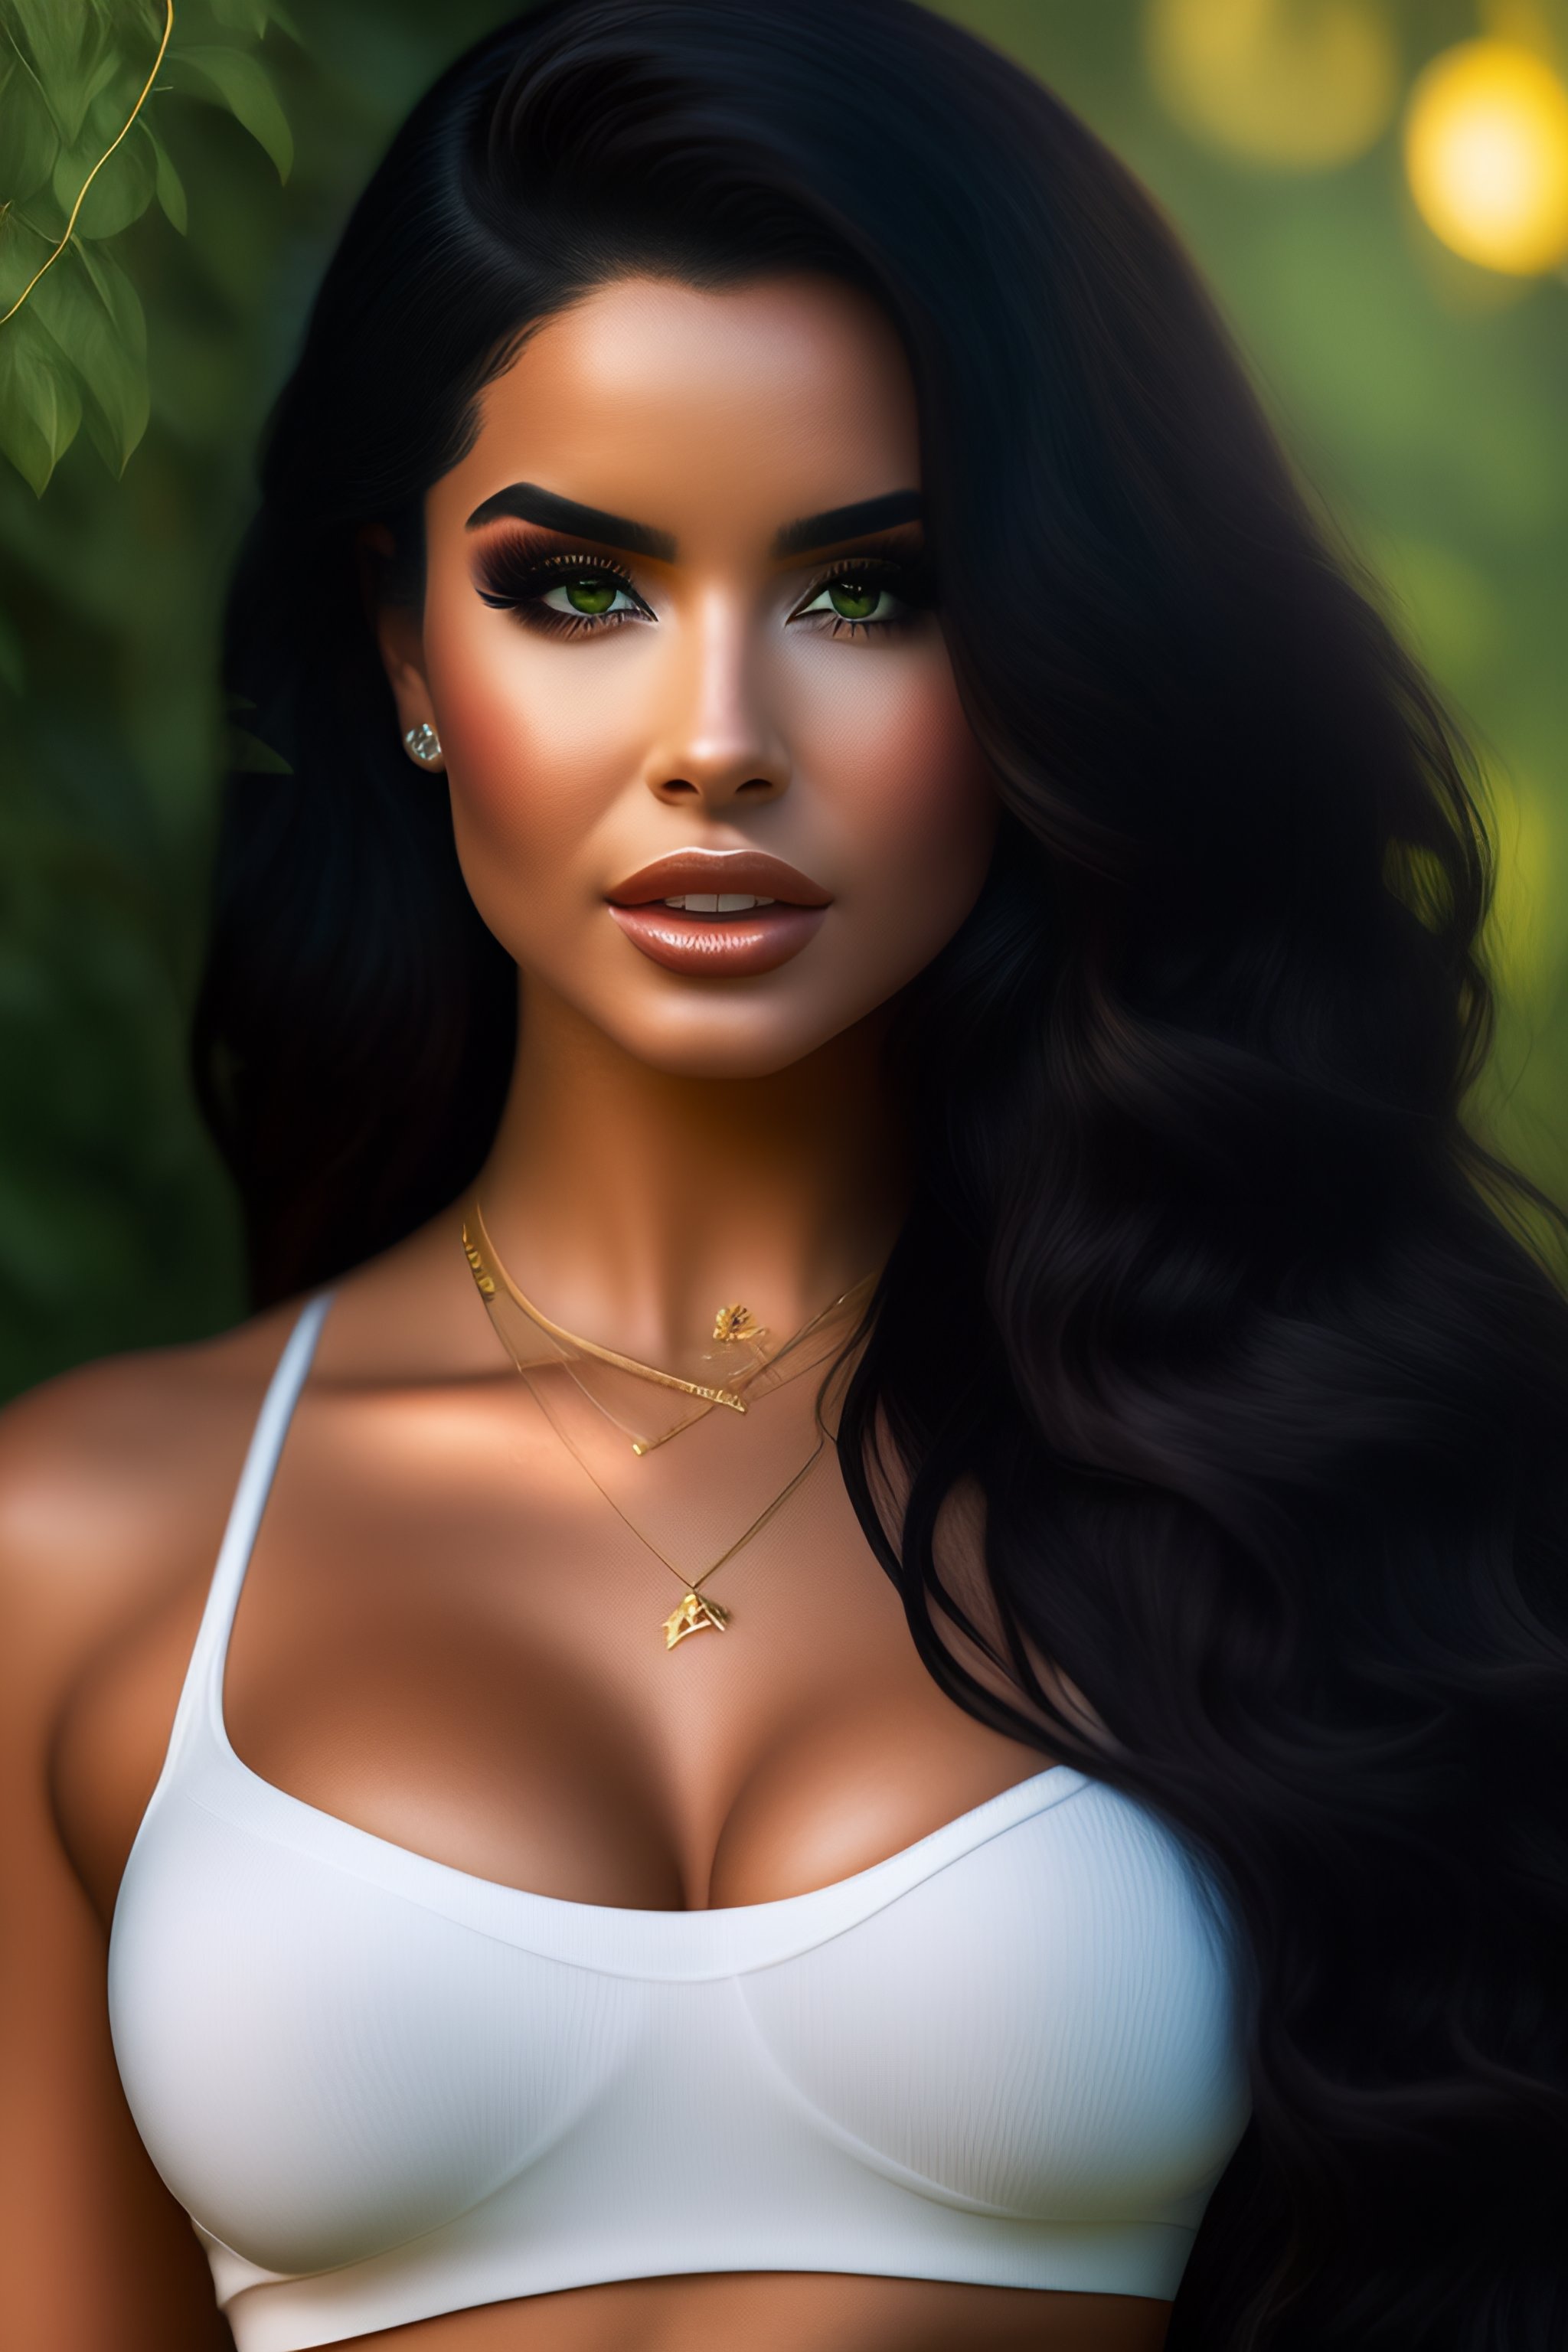 Lexica - Full body length studio photos of a European girl next door with  black hair and green eyes, looks like Demi Rose, wearing t-shirt and  jeans